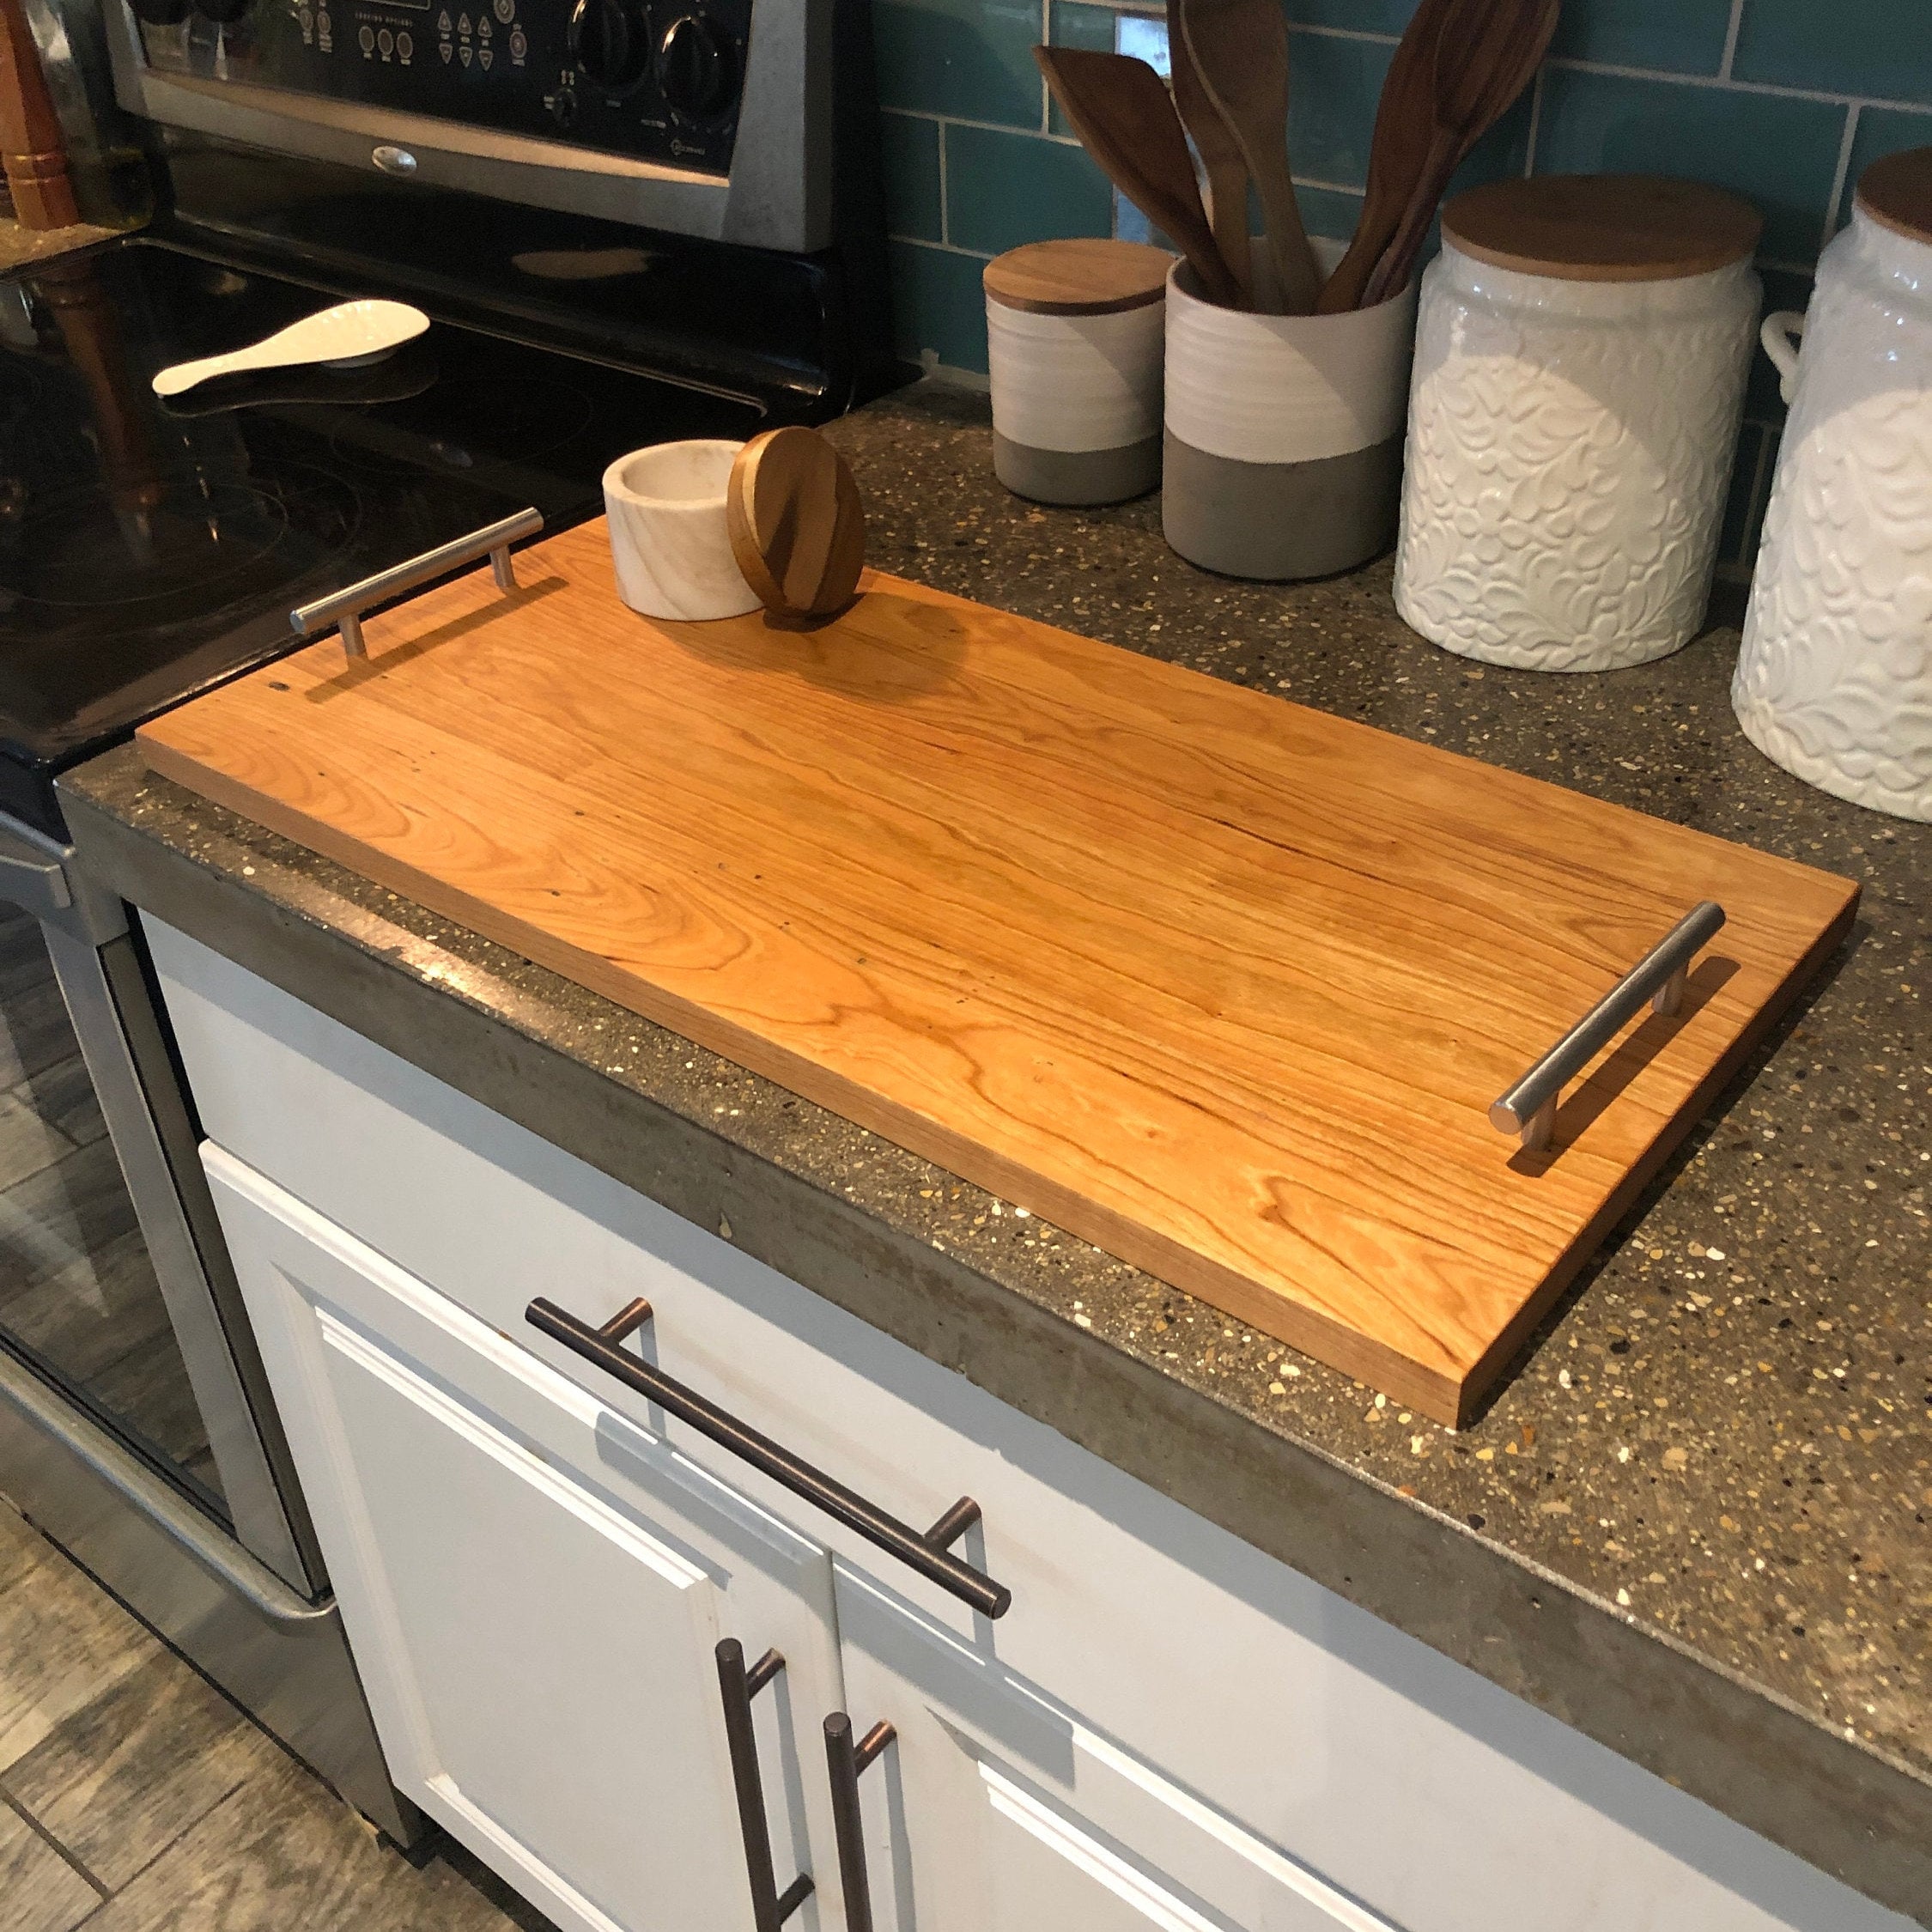 Handmade Large Cutting Board with Handles, Wood Stove Top Cover